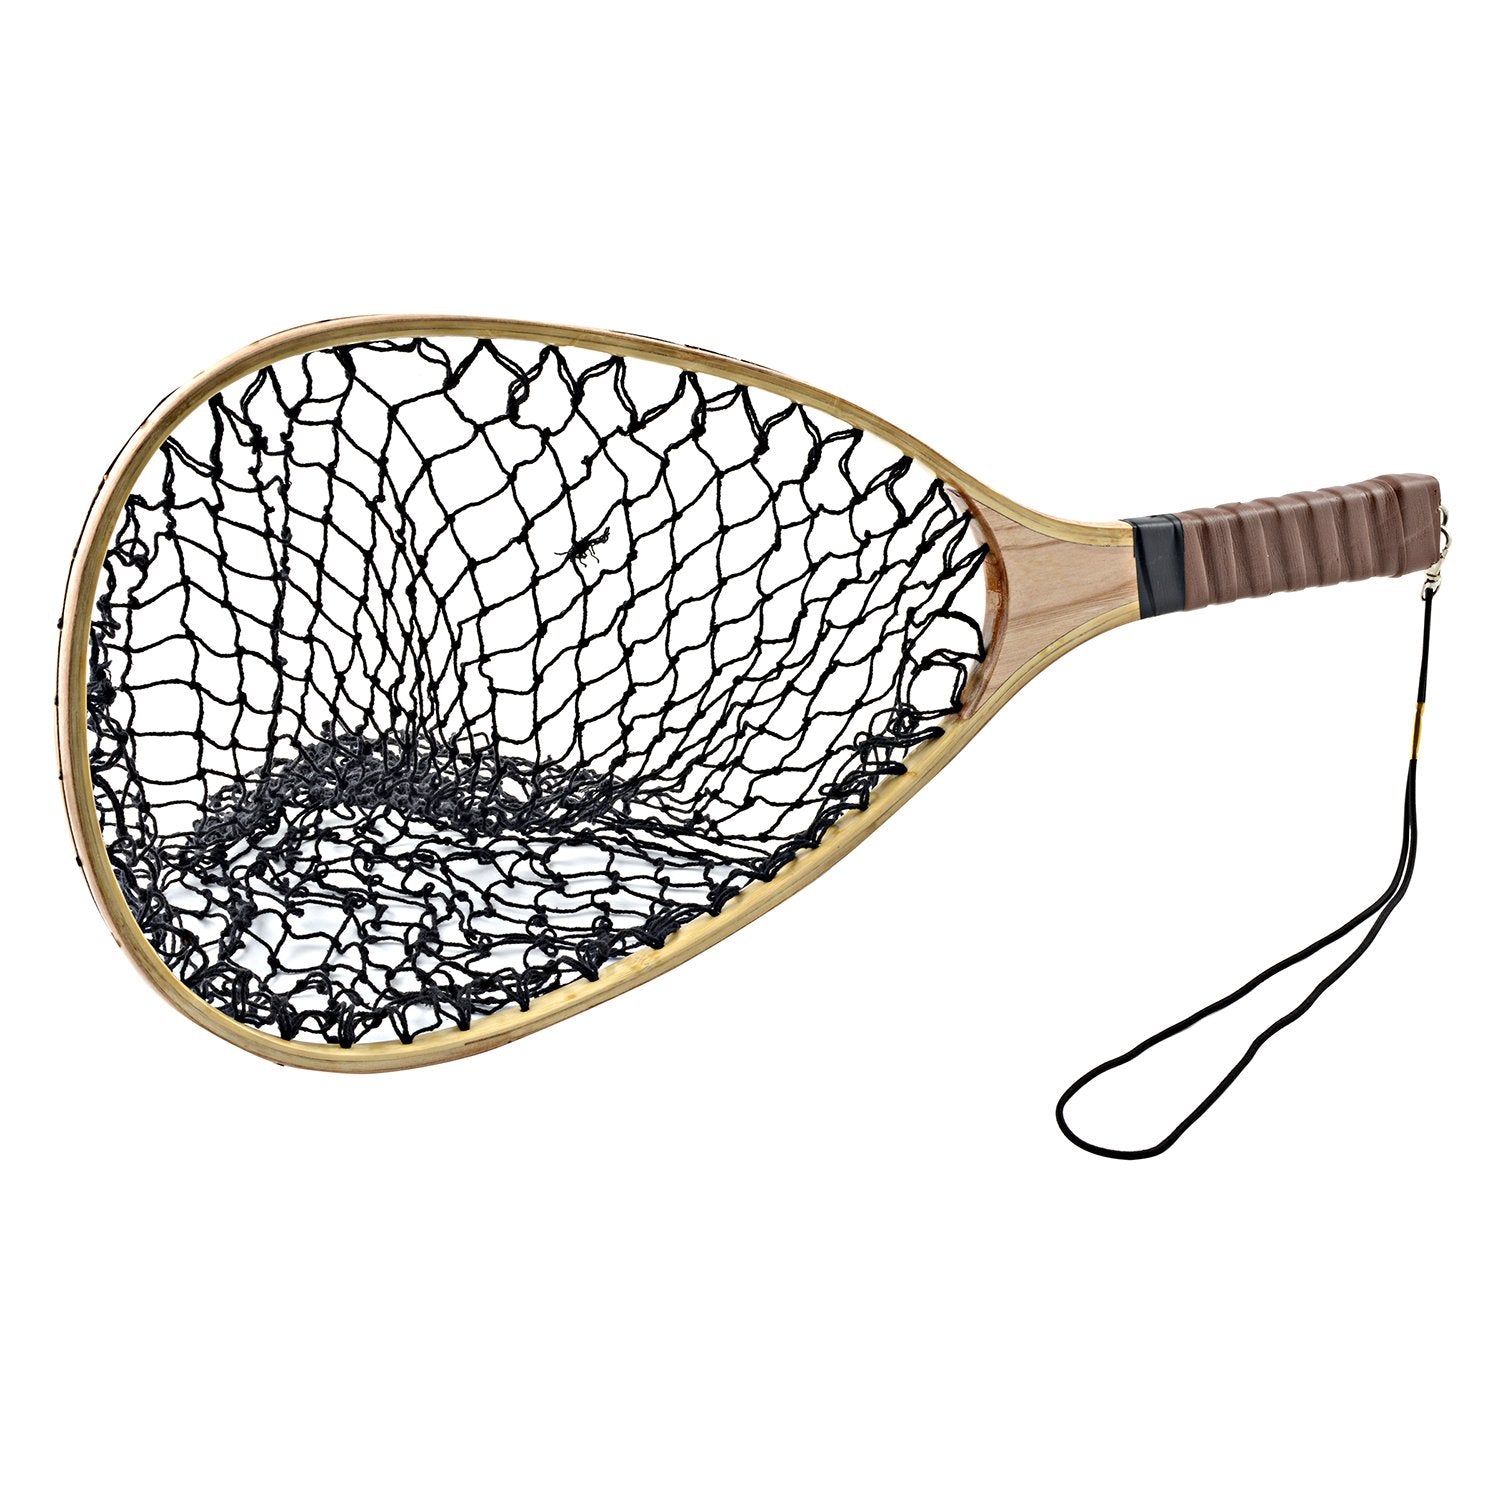 South Bend Mark I Trout Net